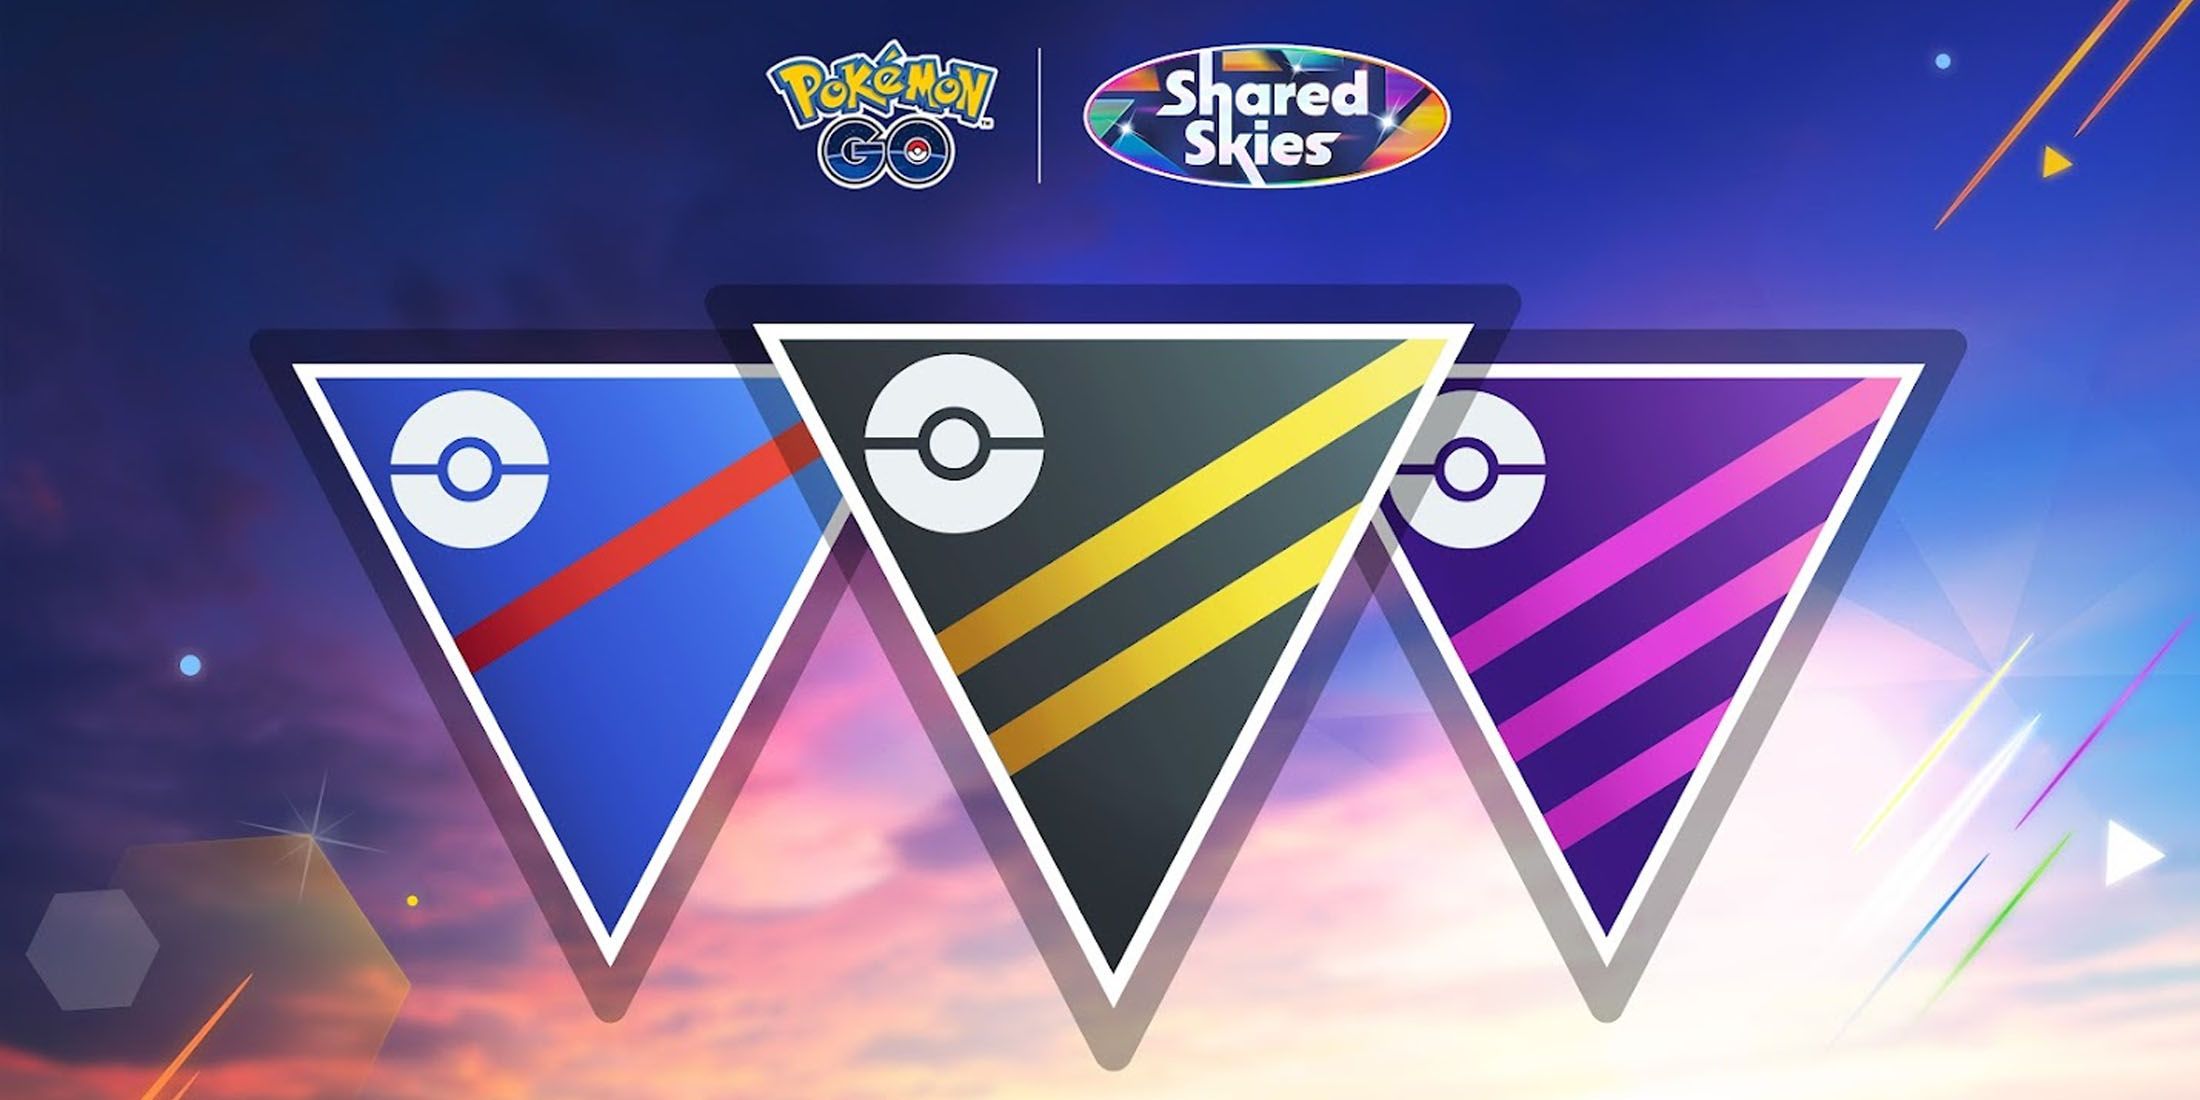 A promotional image for the Pokemon Go Shared Skies Season, featuring its banners.